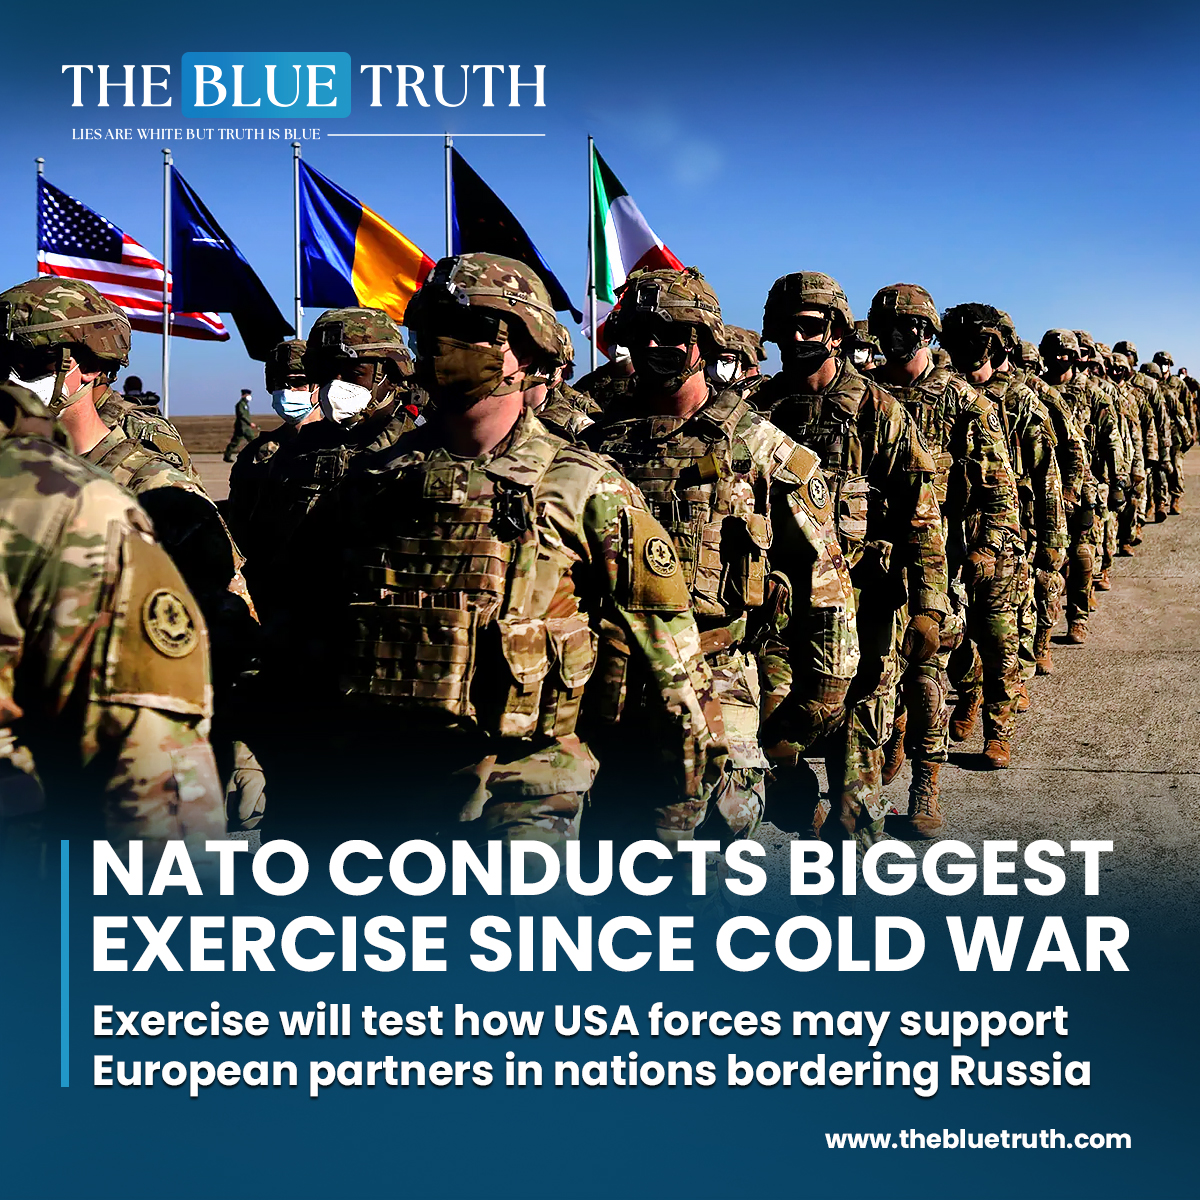 Exercise will test how American forces may support European partners in nations bordering Russia and on the alliance's eastern flank.
#NATOExercise #ColdWarSimulation #MilitaryReadiness #SecurityAlliance
#USForces #EuropeanPartnership #tbt #TheBlueTruth